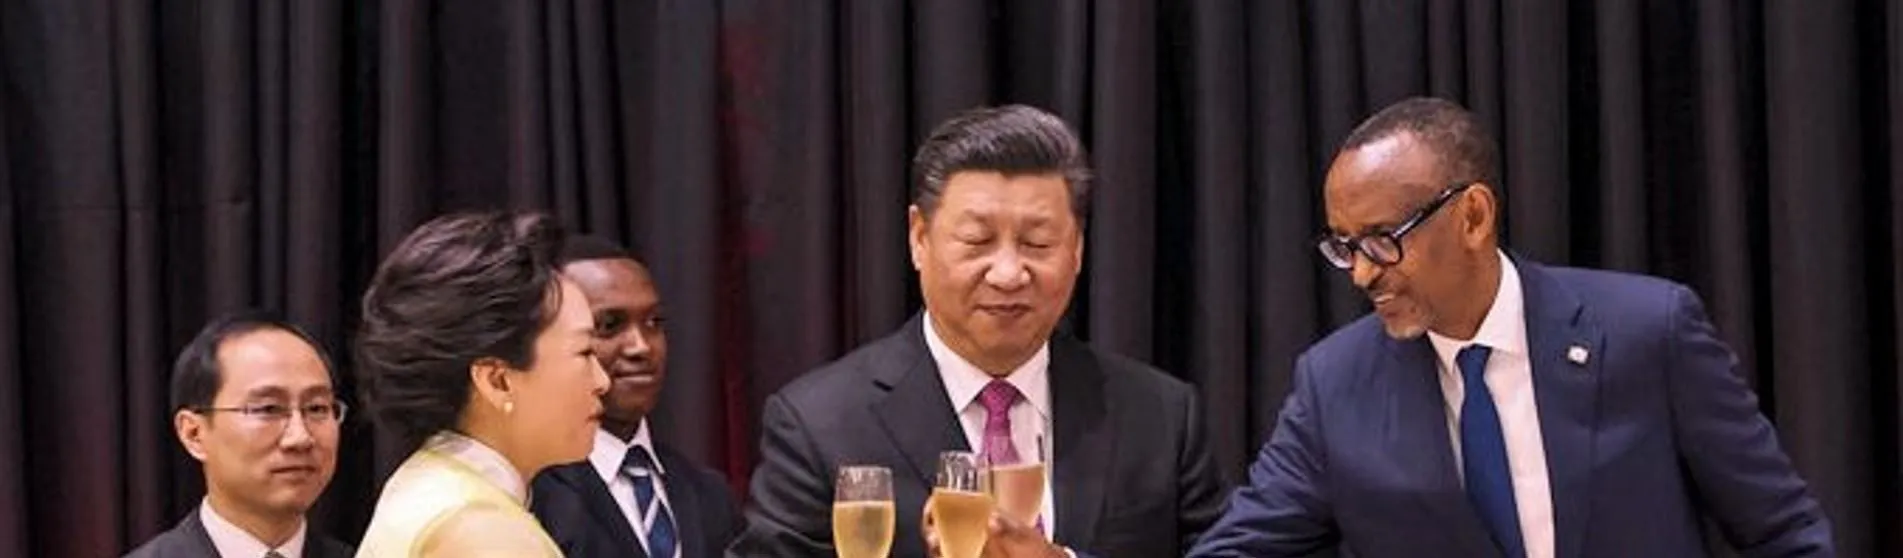 Xi-and-Kagame-dinner-3x2-1. 1903 - 558 jpg